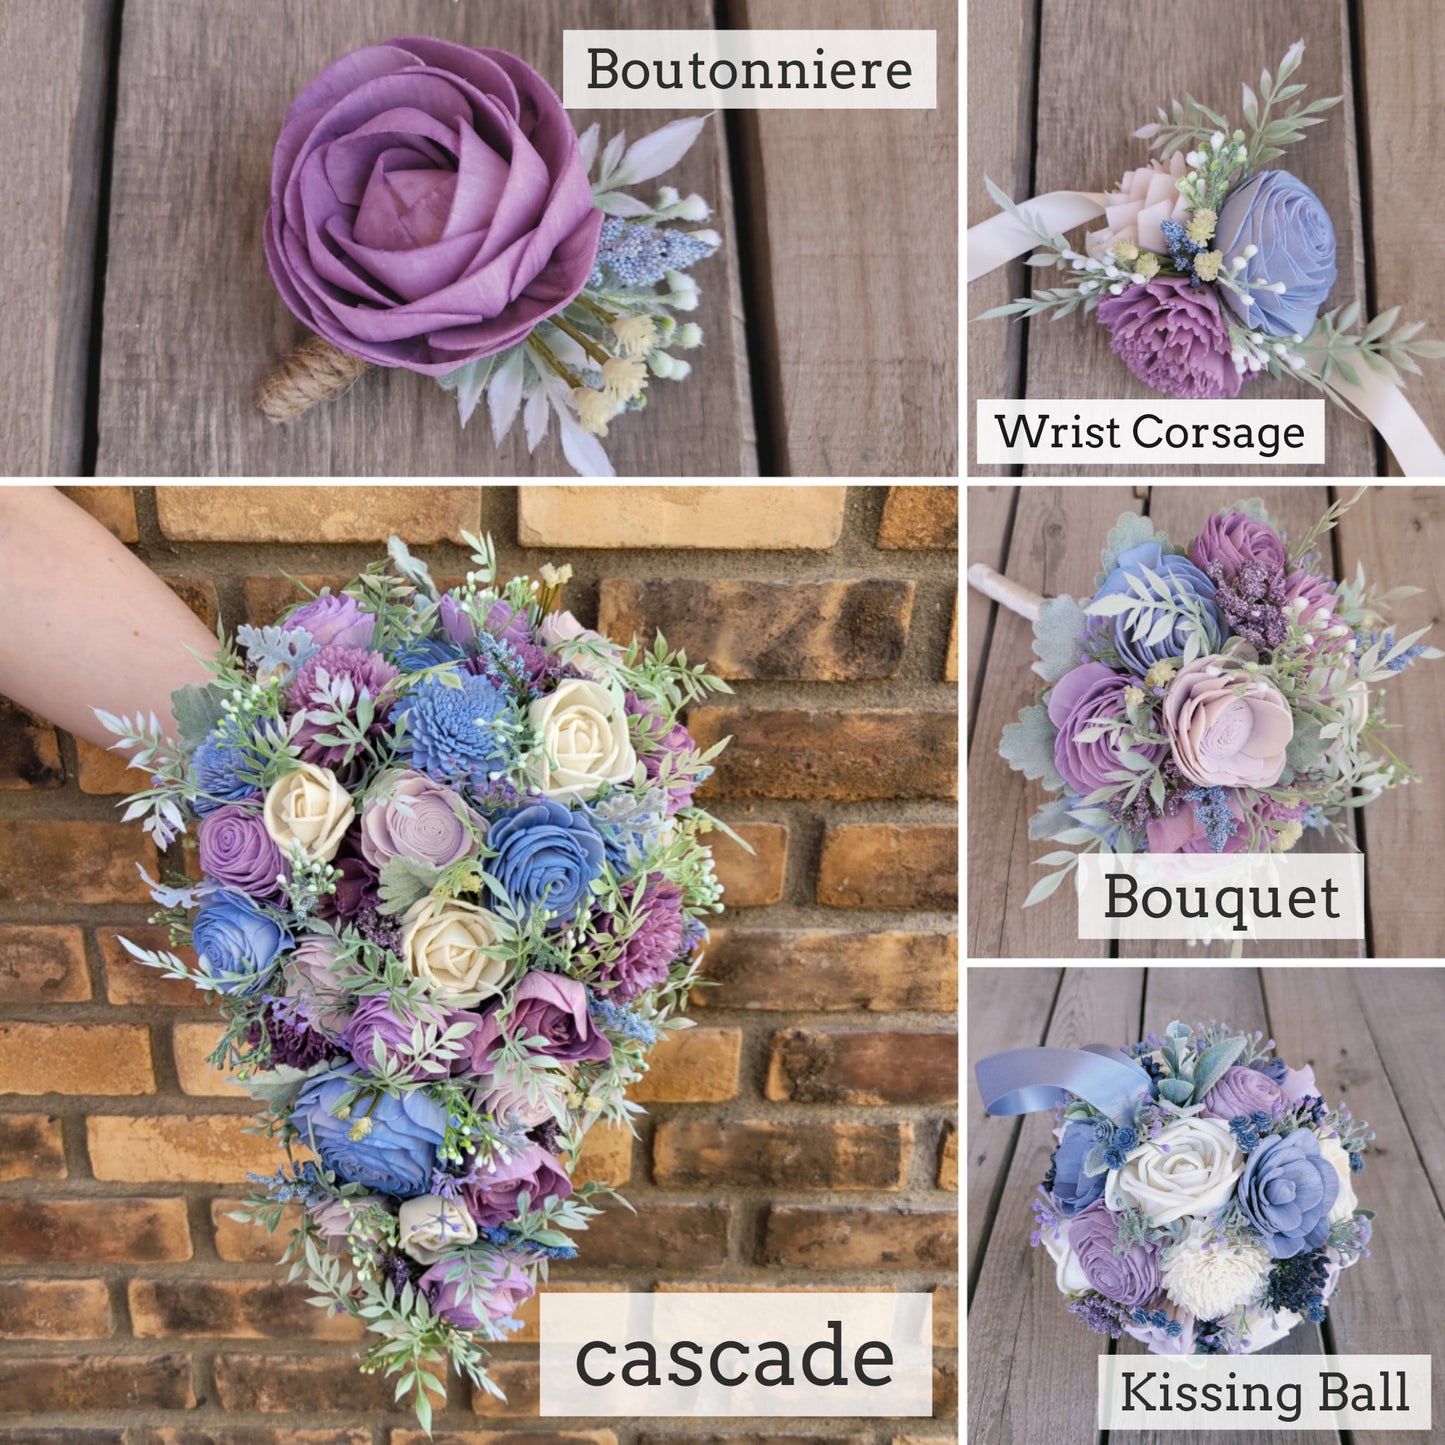 Wood Flower Bouquet with Baby's Breath, Sola Wood Flower Bridal Bouquet, Wooden Wedding Flowers